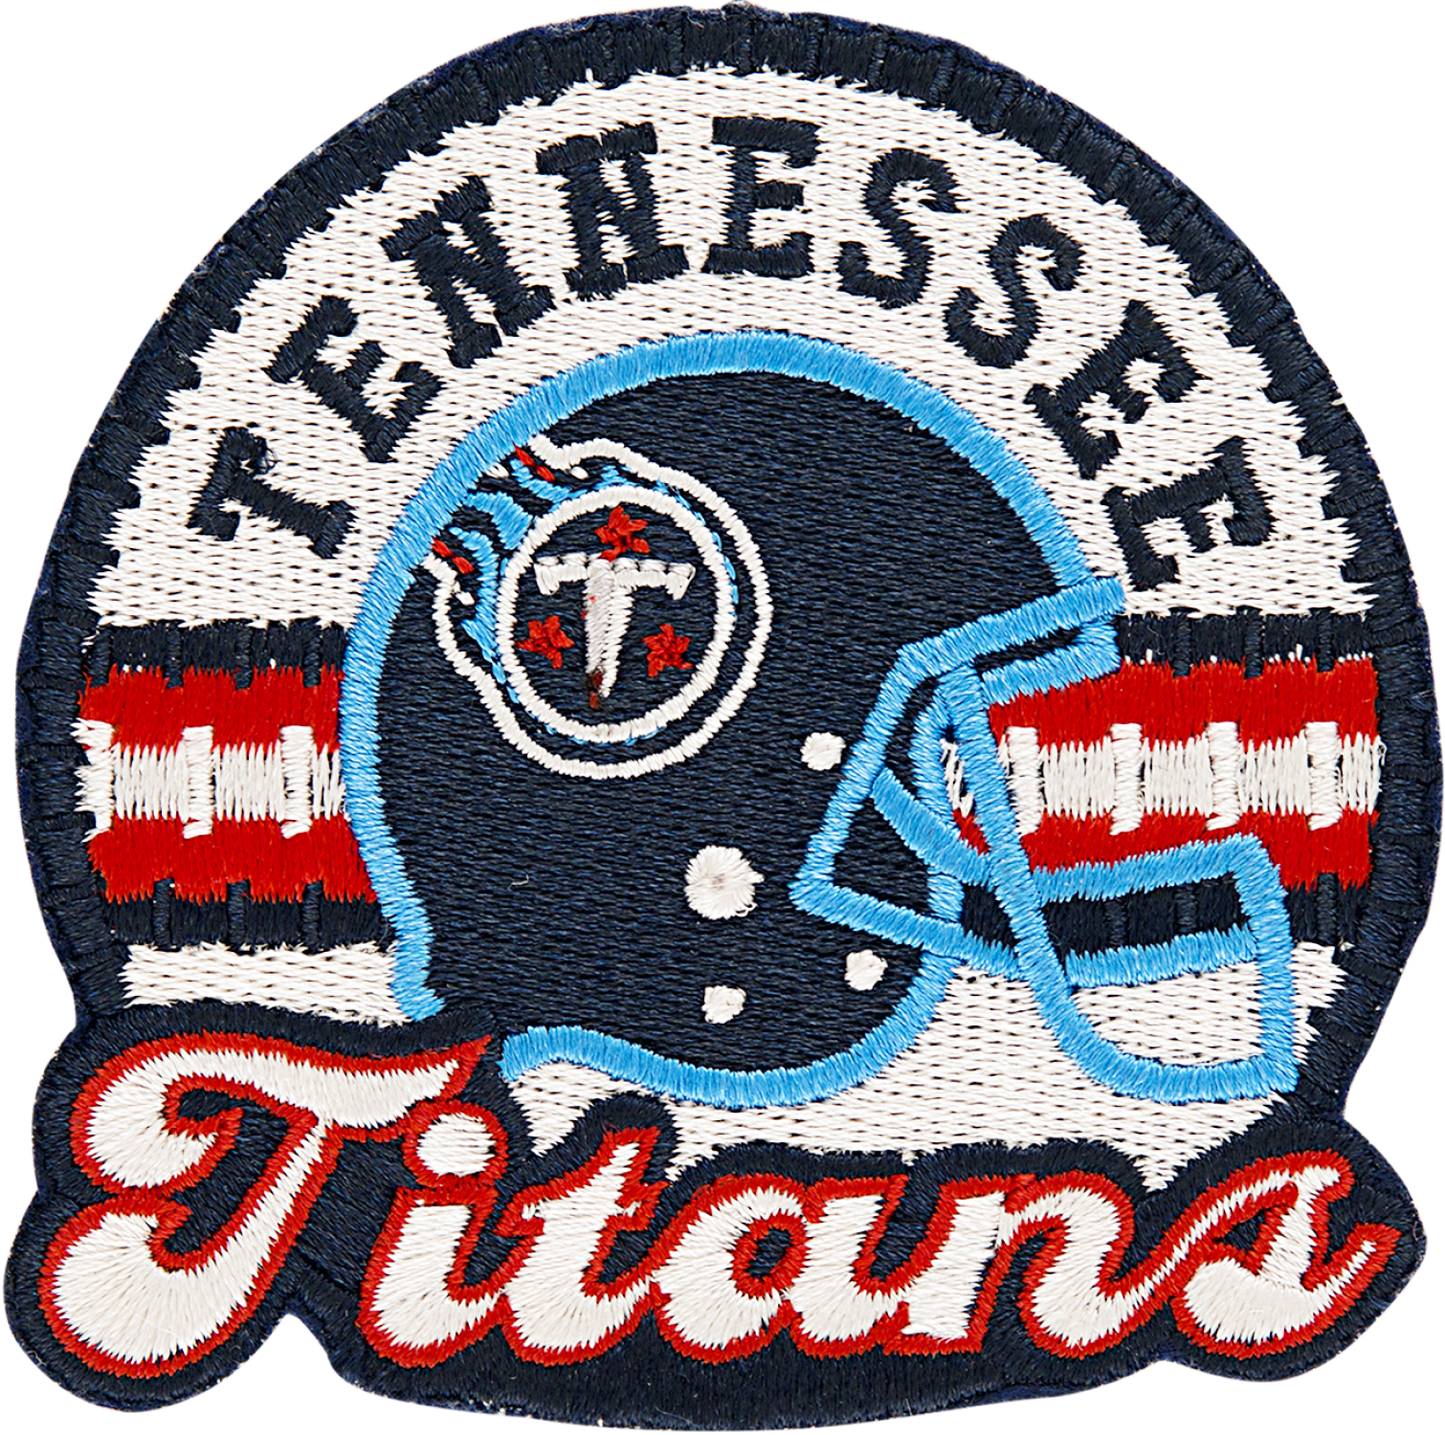 Tennessee Titans Patch (Pre-Order)